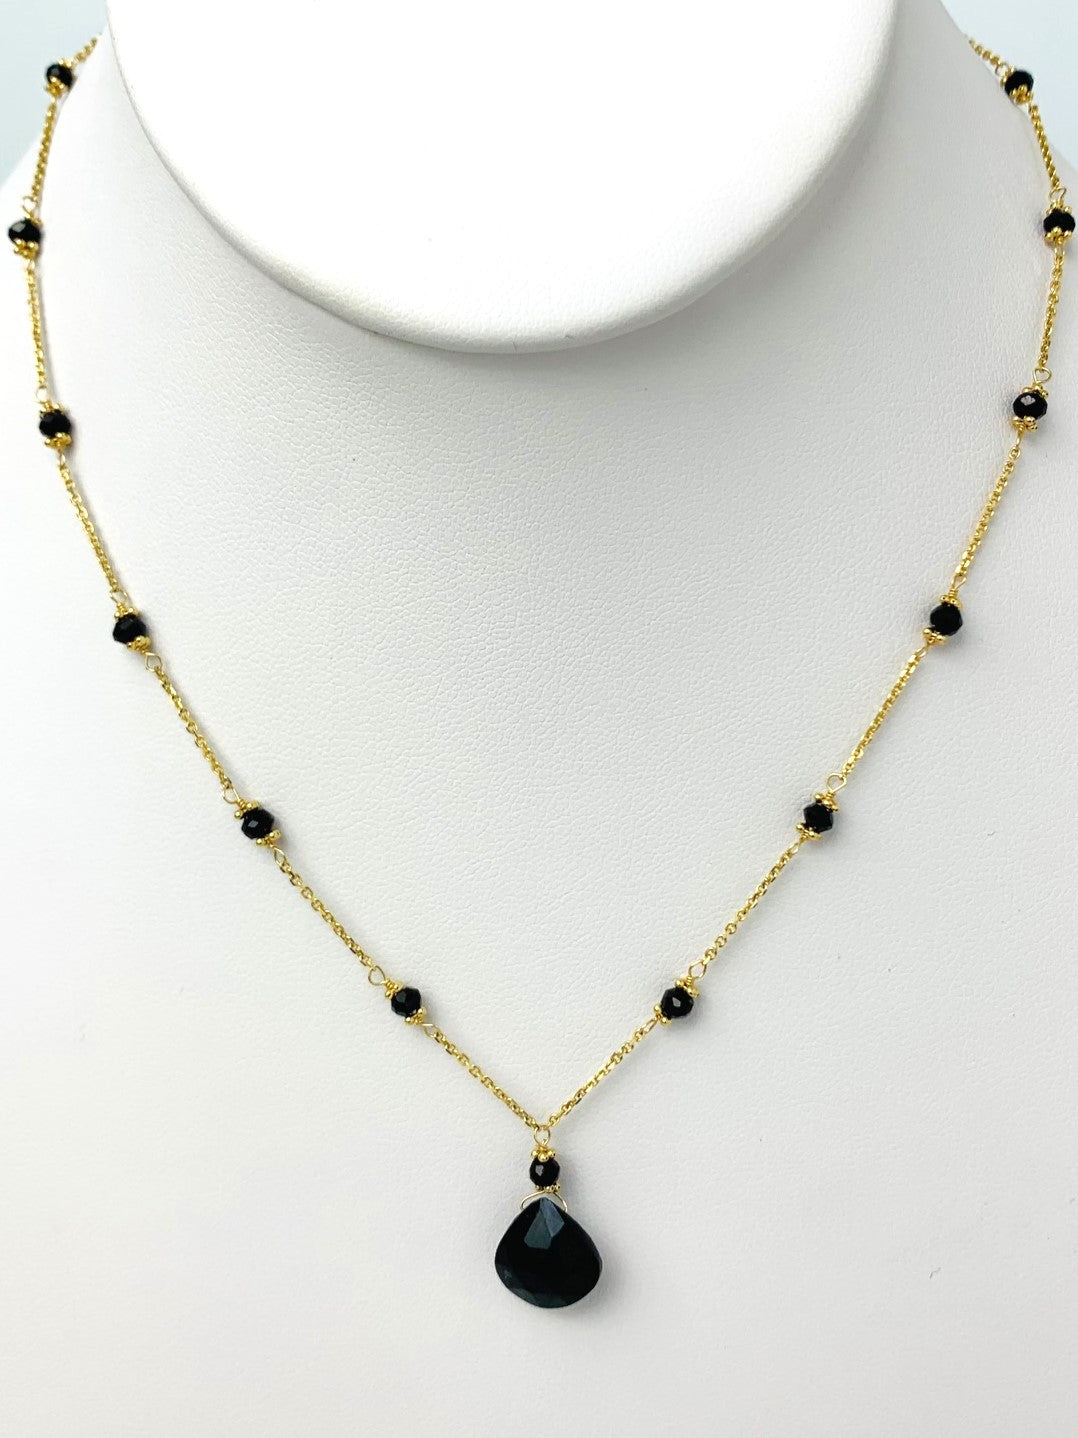 16"-17" Onyx Station Necklace With Center Drop in 14KY - NCK-469-DRPGM14Y-OX-17